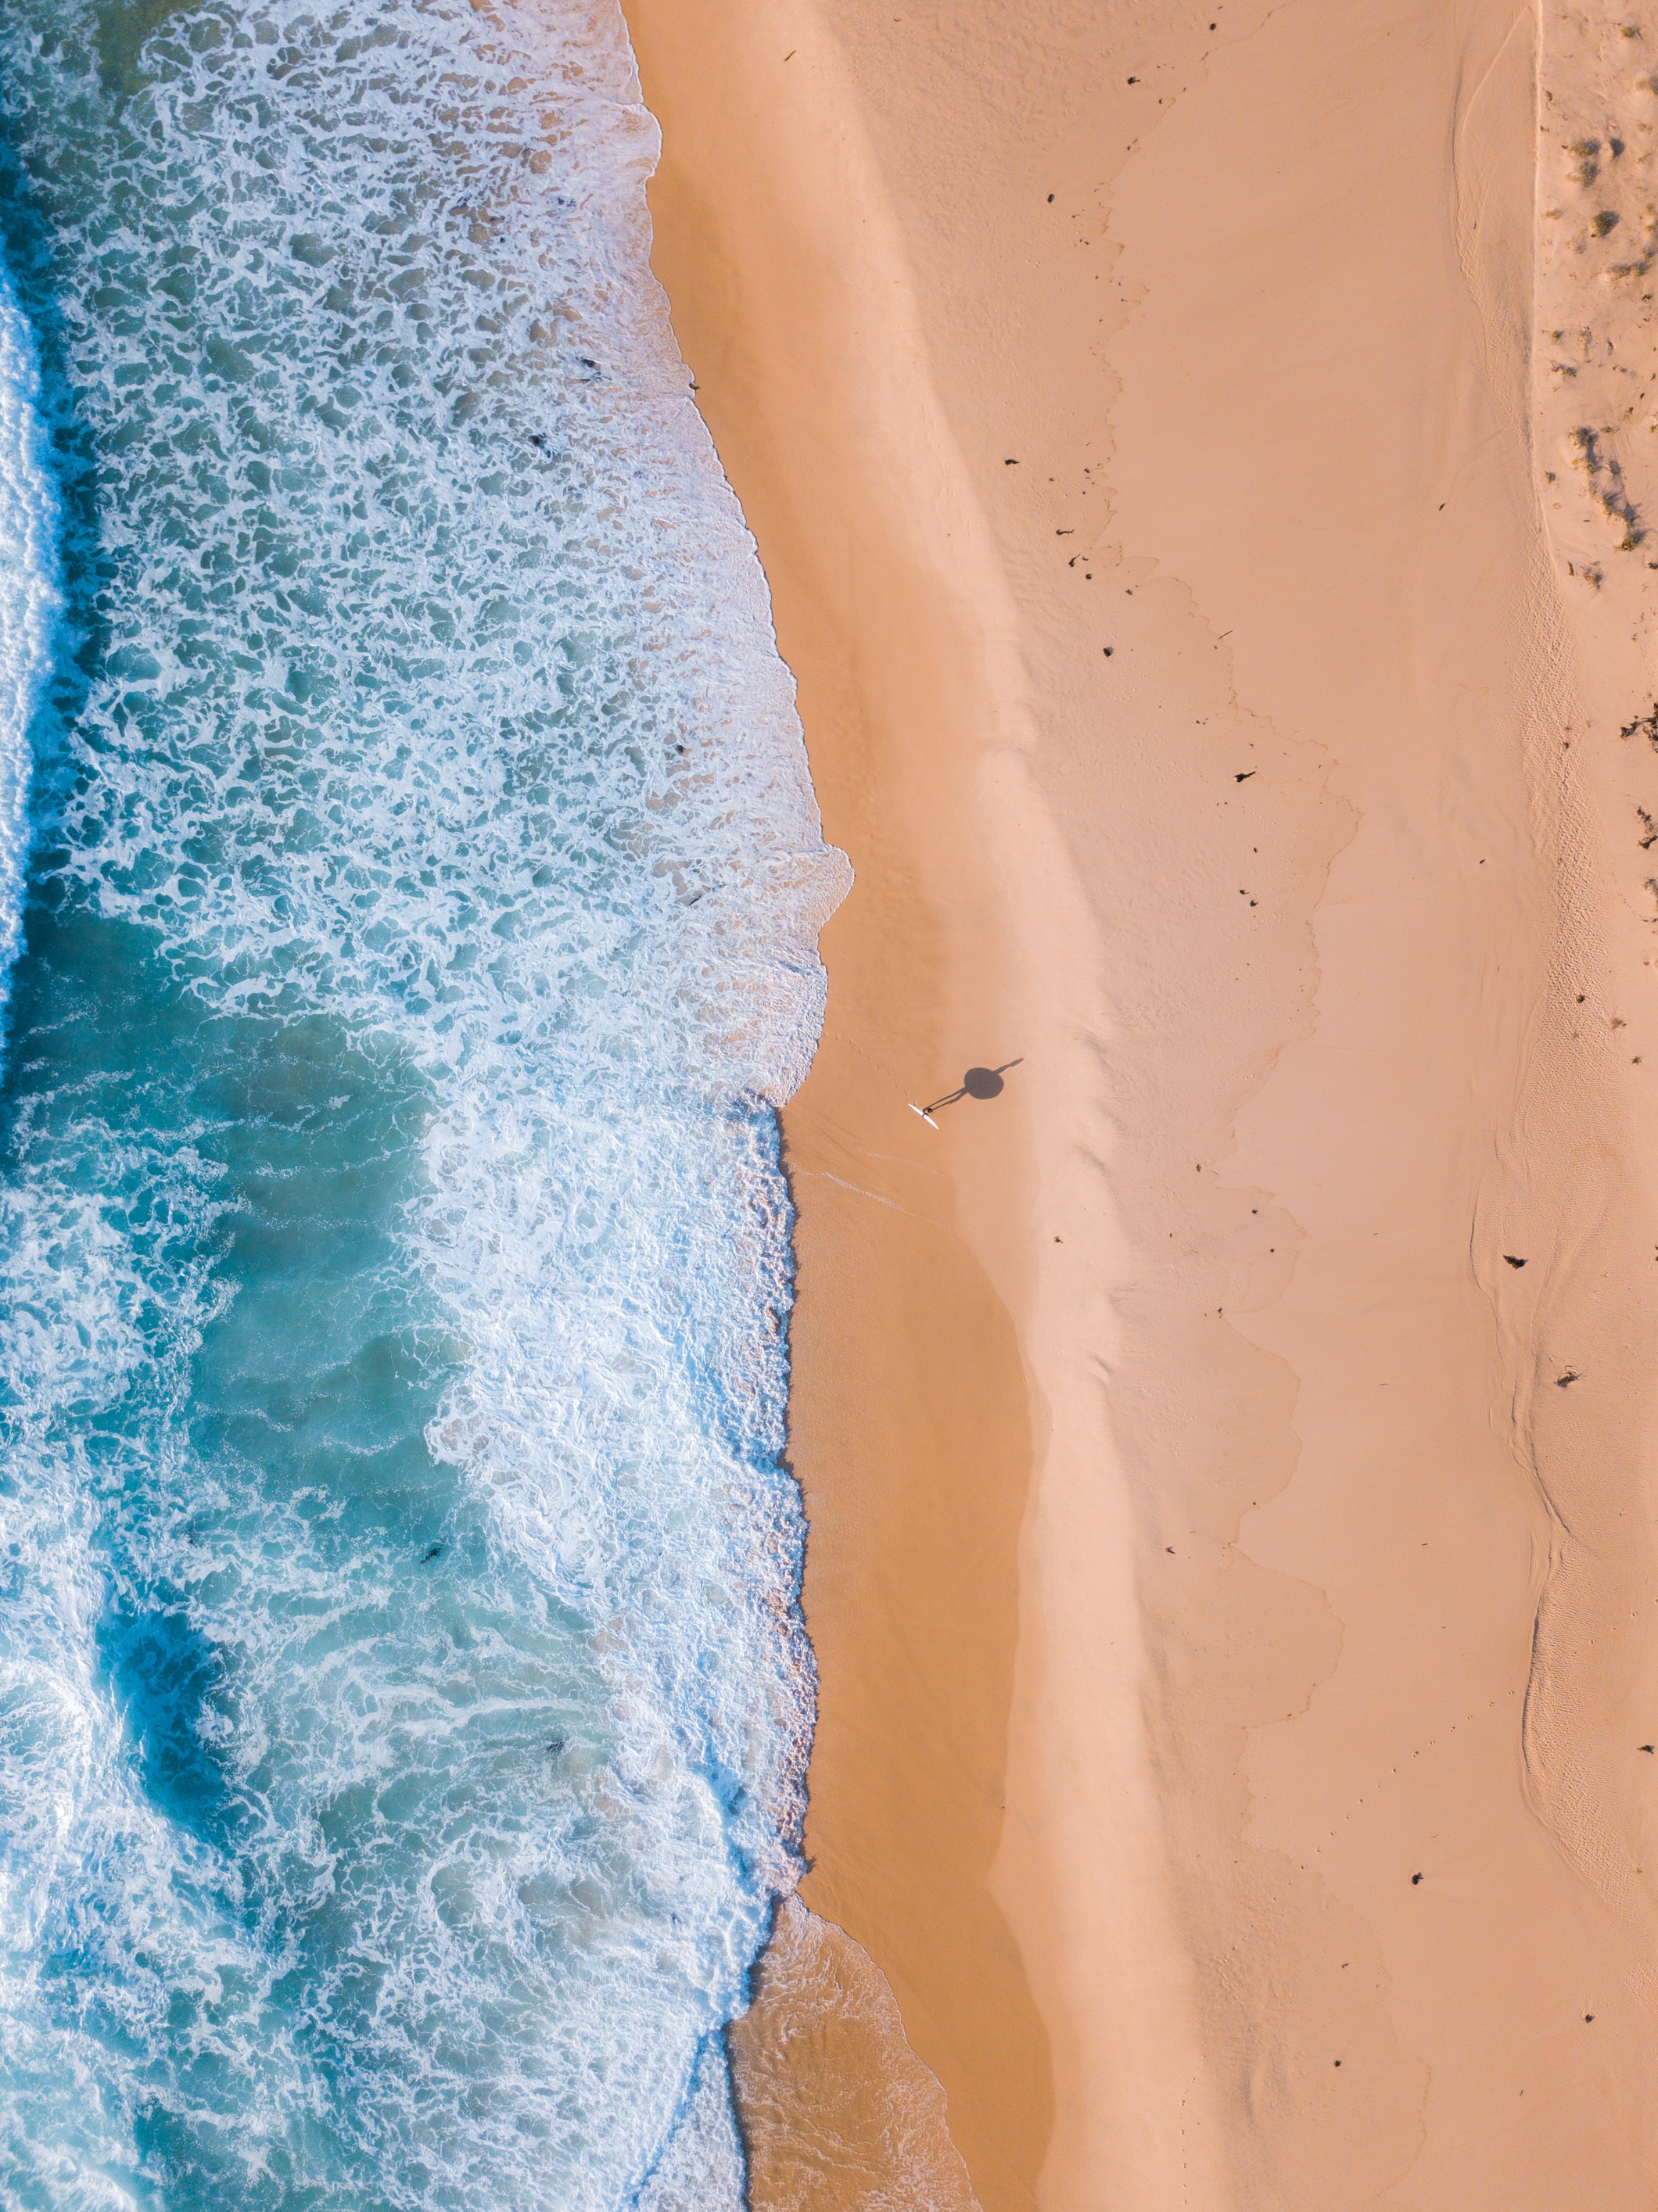 32k Wallpaper Surf view from above, beach, sand, water